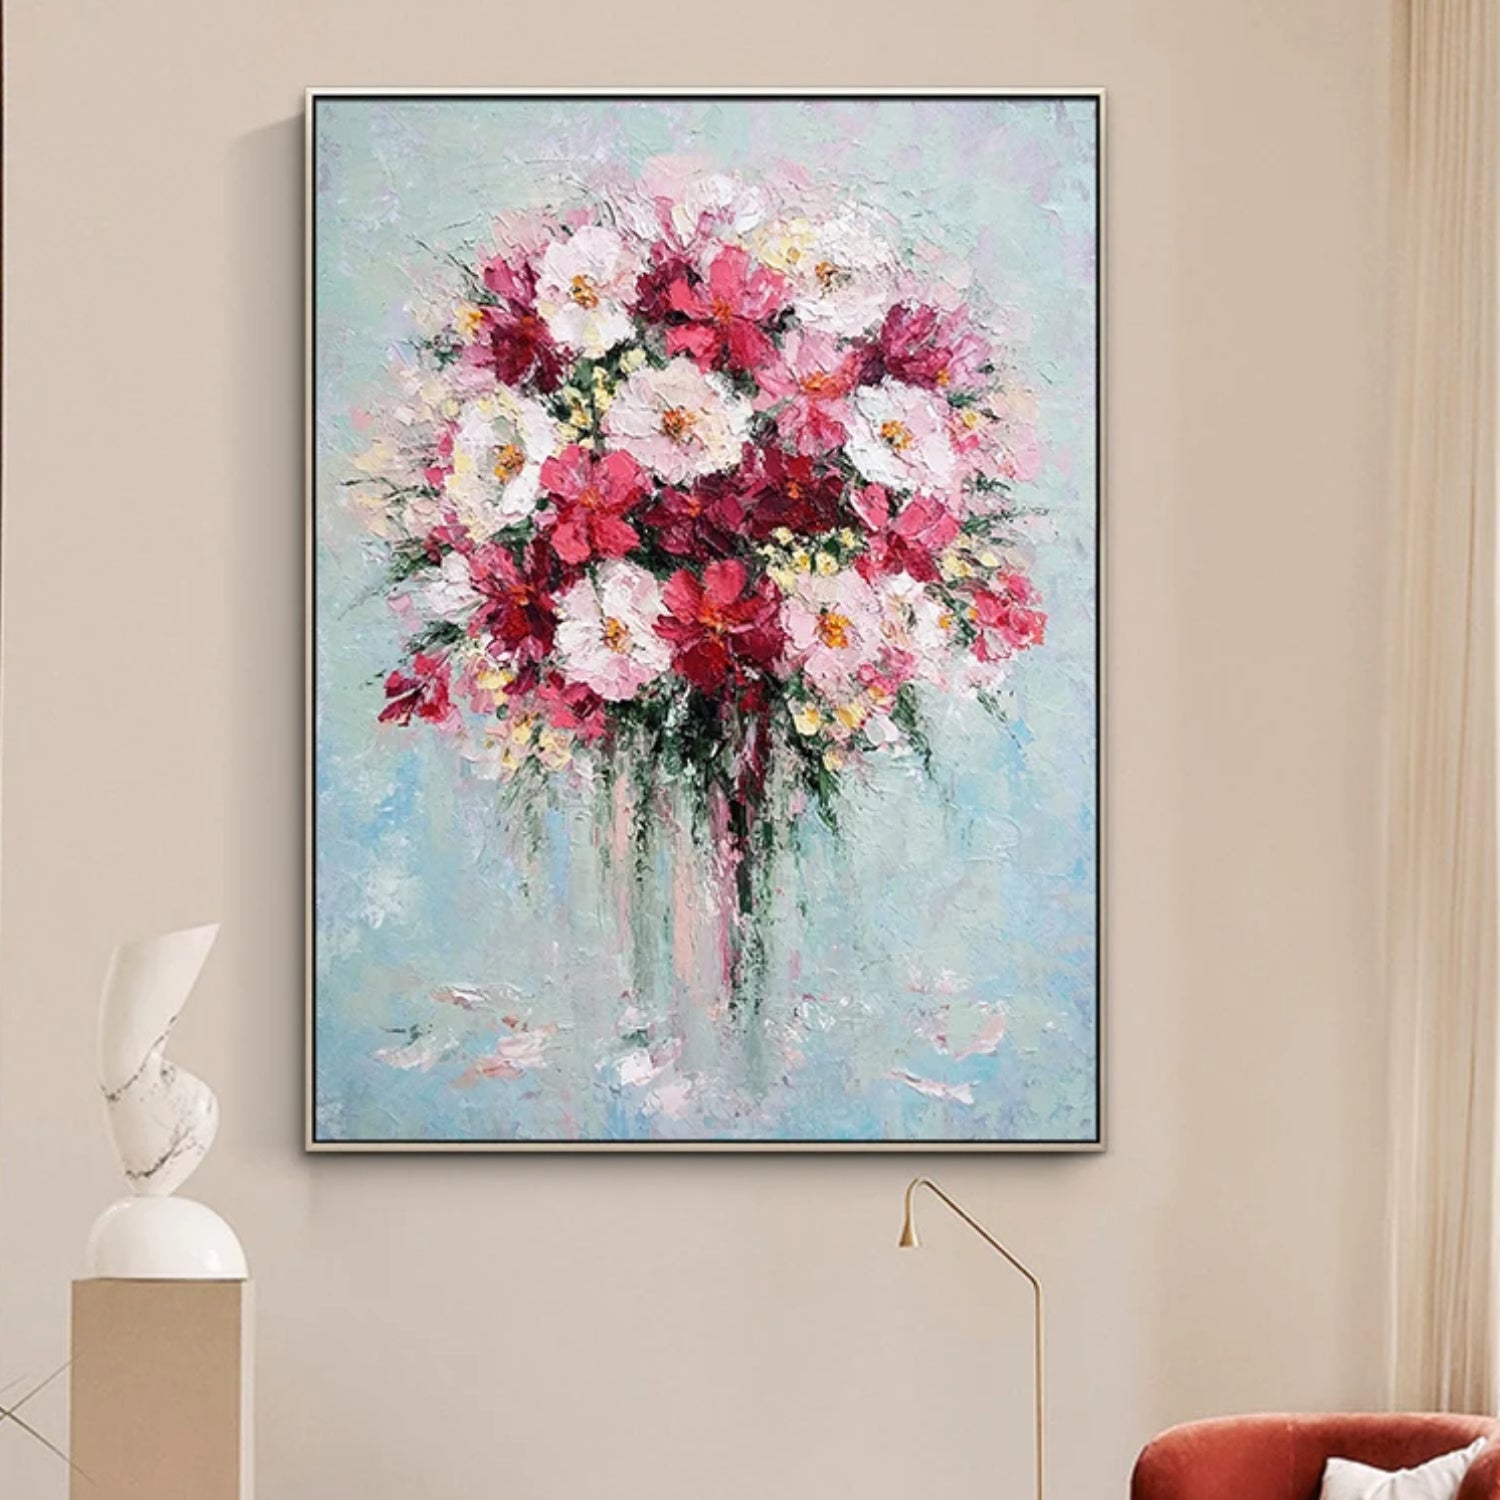 Vibrant Impasto Peoney Floral Vase Textured Wall Painting